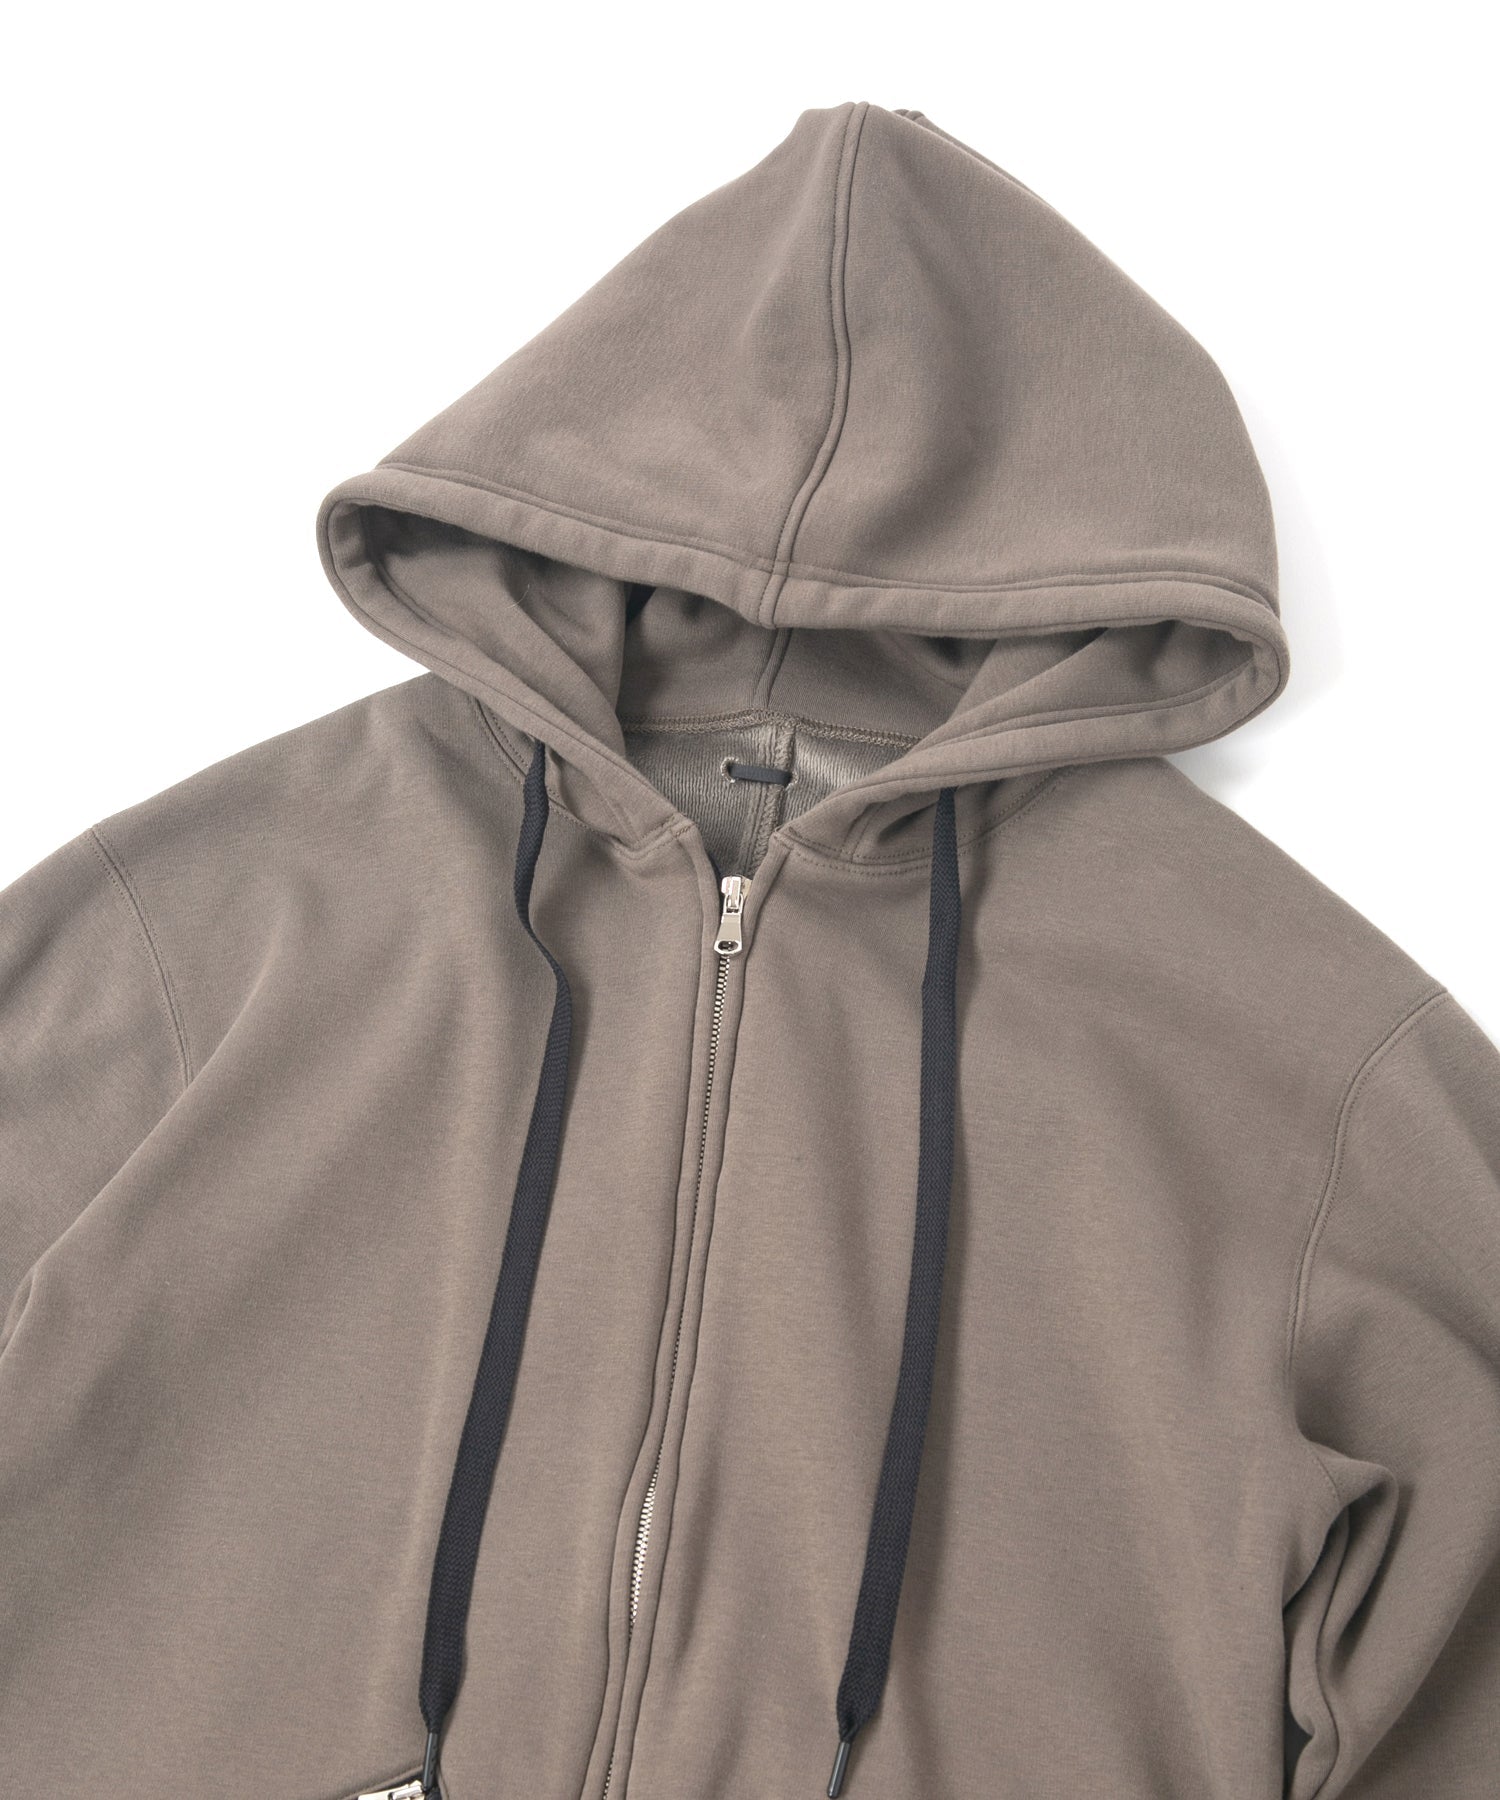 Load image into Gallery viewer, Stretch Cotton Polyester Knit Backside Velor finish Zip up Hoodie - OLIVE